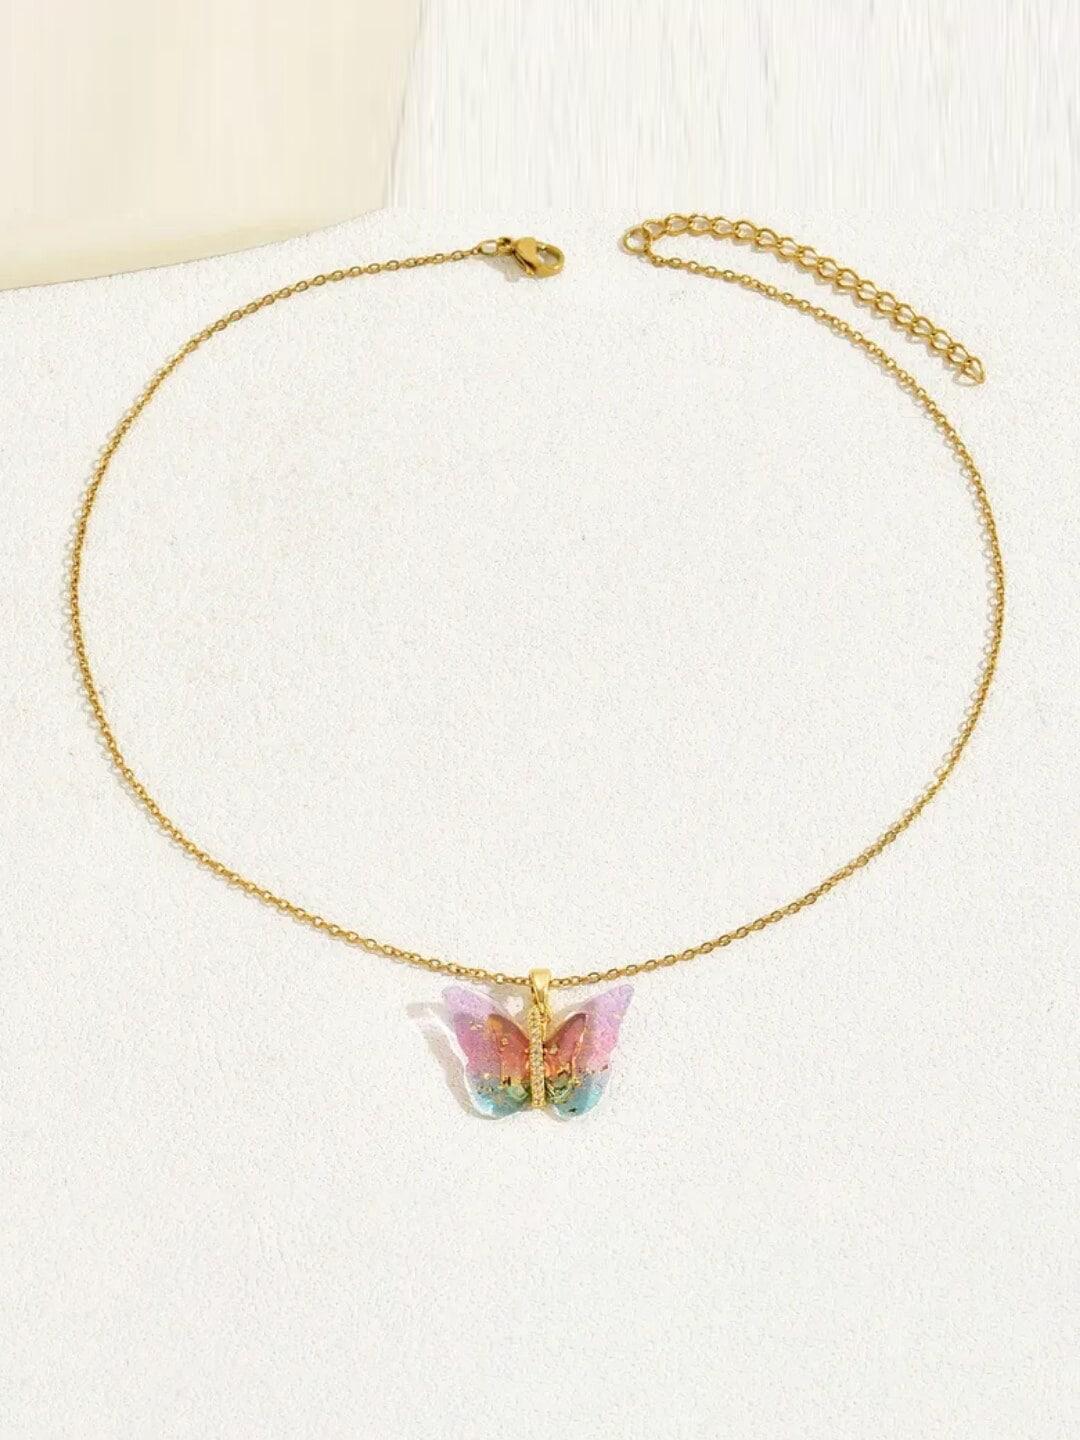 salty-stainless-steel-stone-studded-winged-beauty-necklace